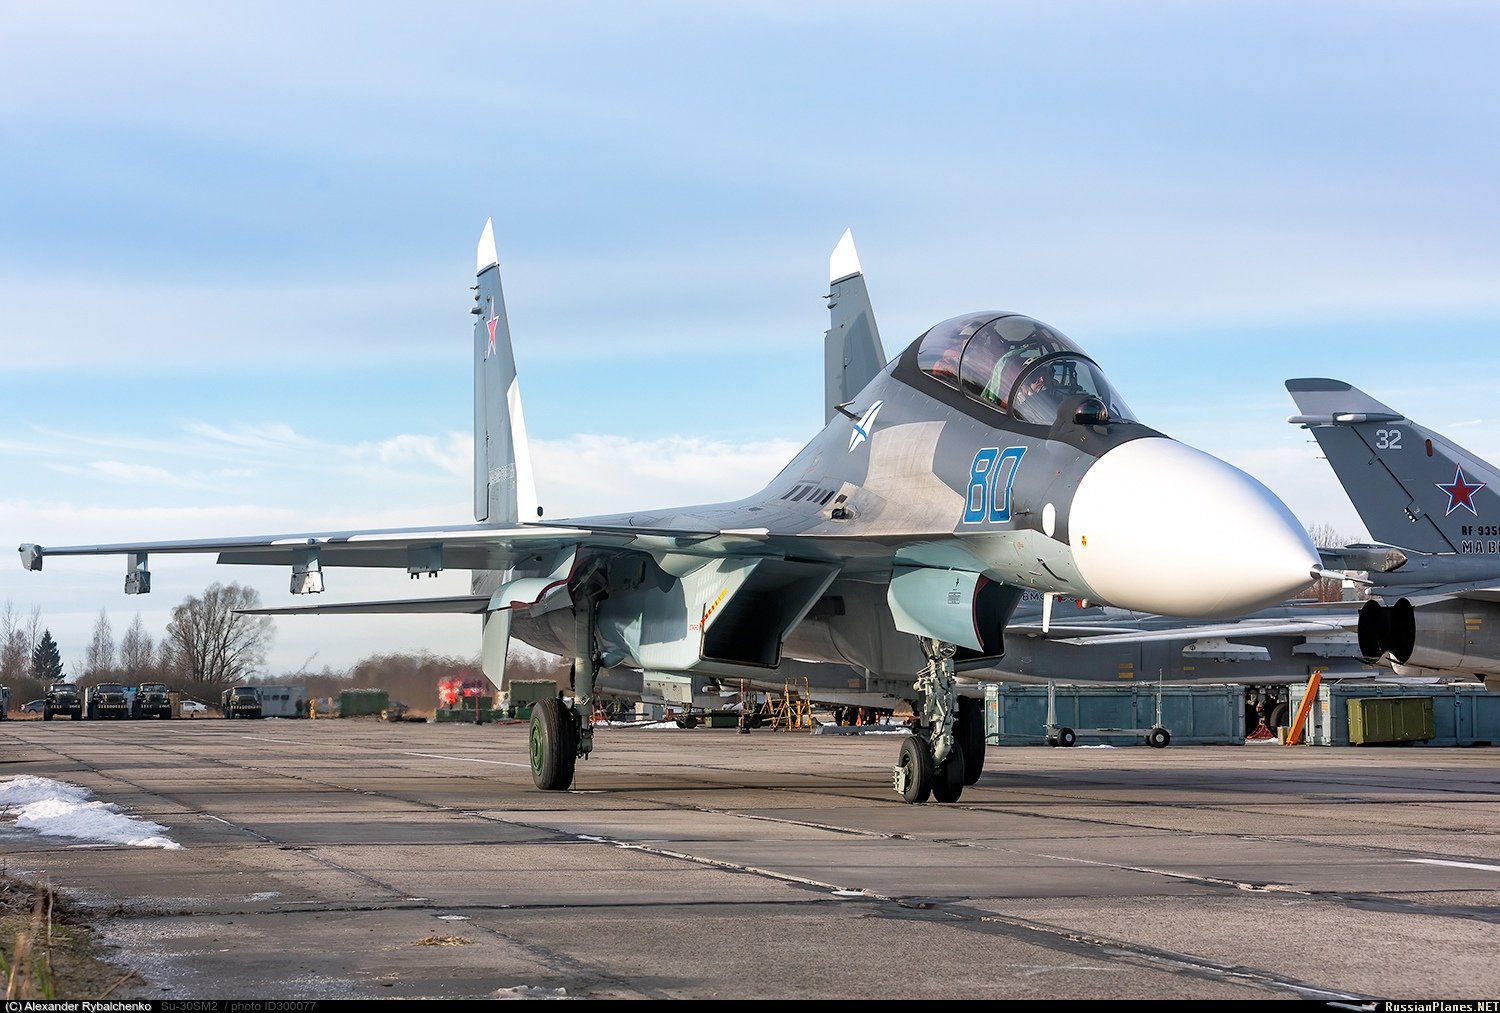 Rob Lee on X: "Photos of new Su-30SM2 fighters for Russia's Naval Aviation. 35/ https://t.co/KWgVqIHHSW https://t.co/G3ox3RFw2p https://t.co/6GcsqopGqR https://t.co/4plCJRnEsK" / X